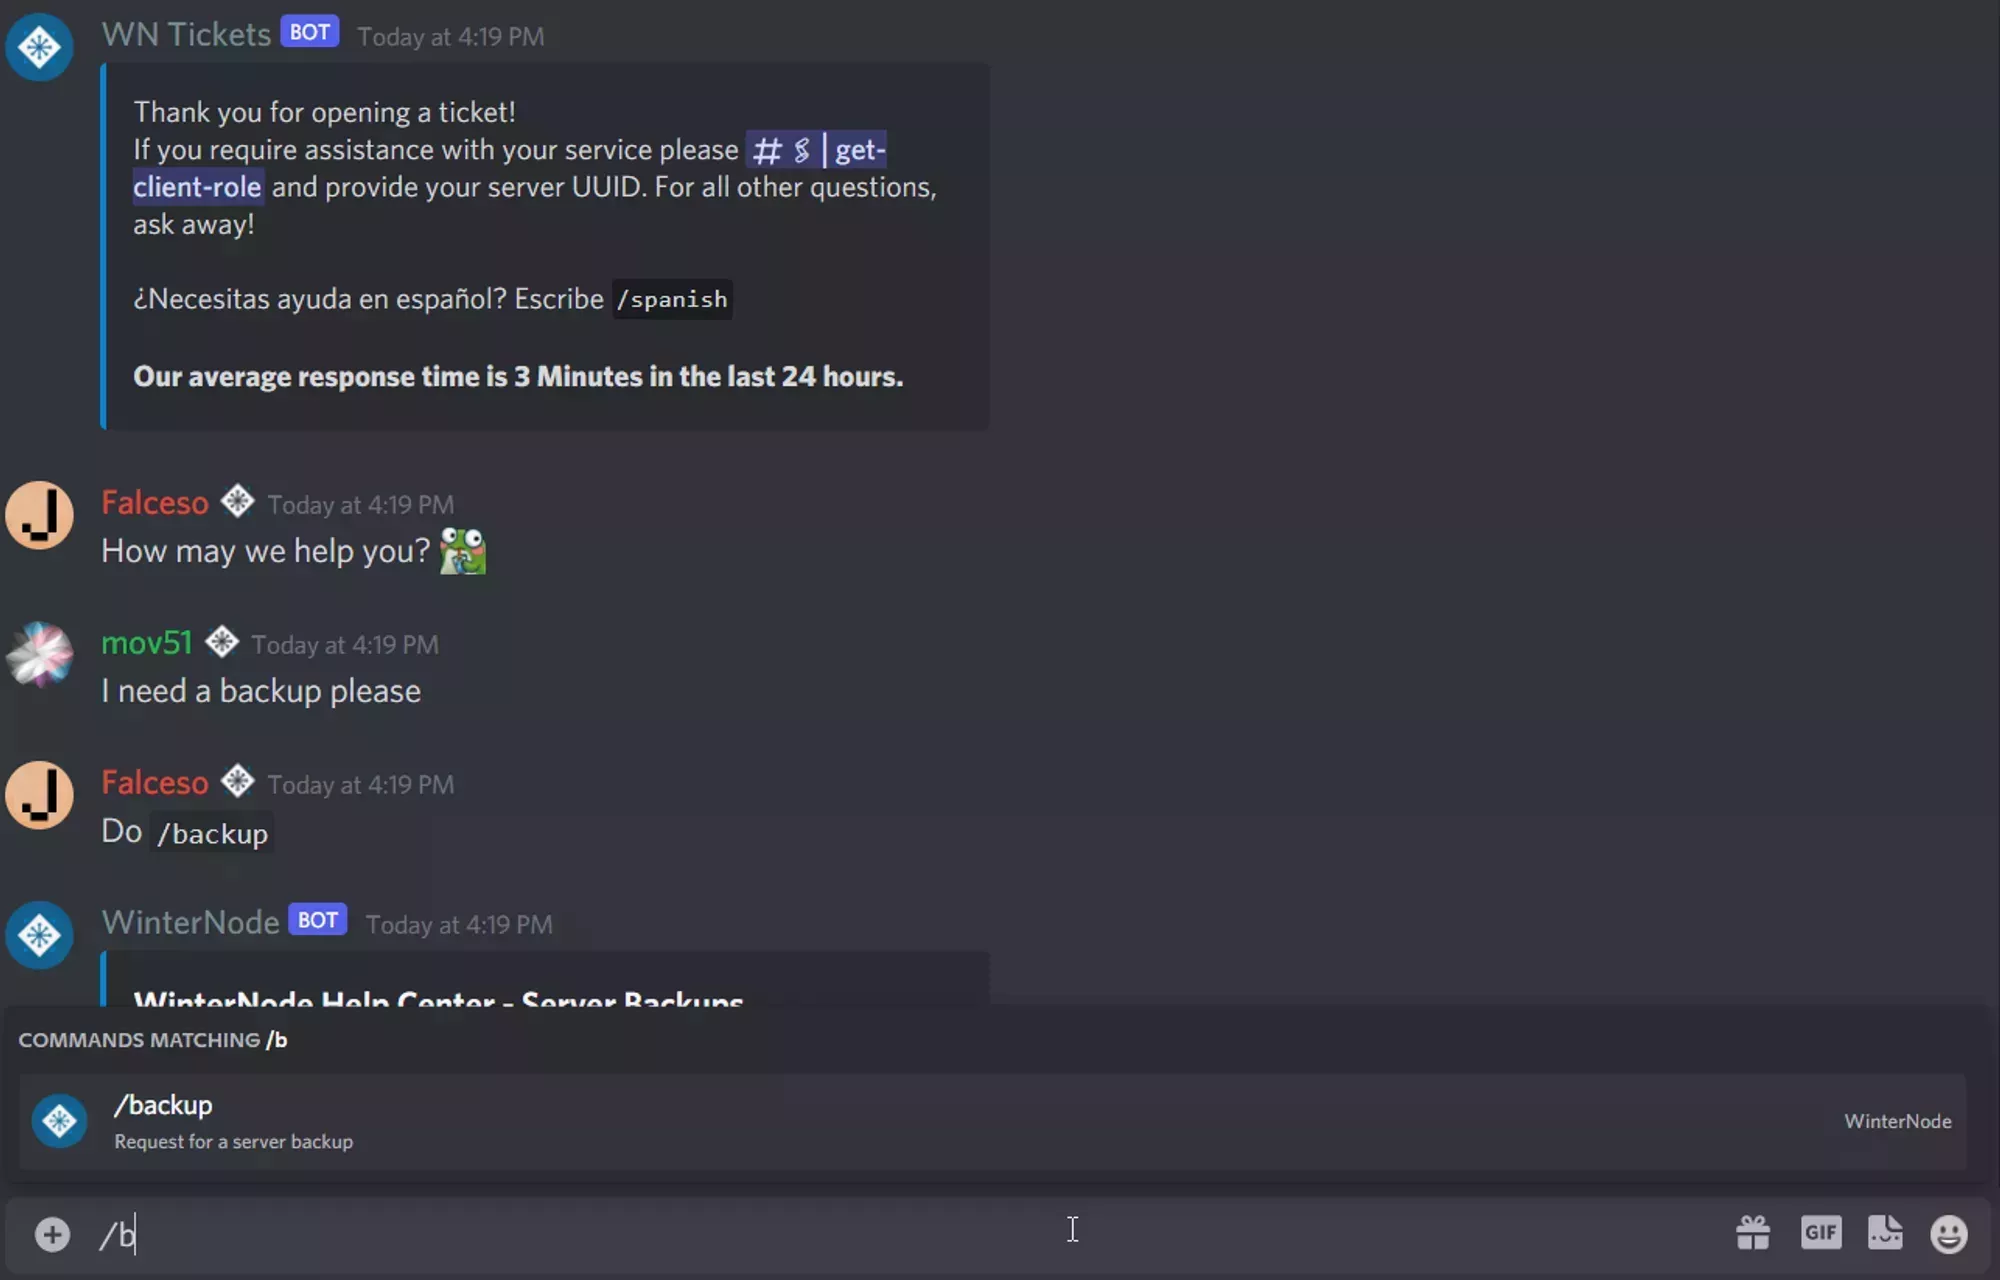 A conversation in a WinterNode support ticket directing the user to use the /backup command and the chat box partially filled with the comand with Discord autocompleting the remainder of /backup